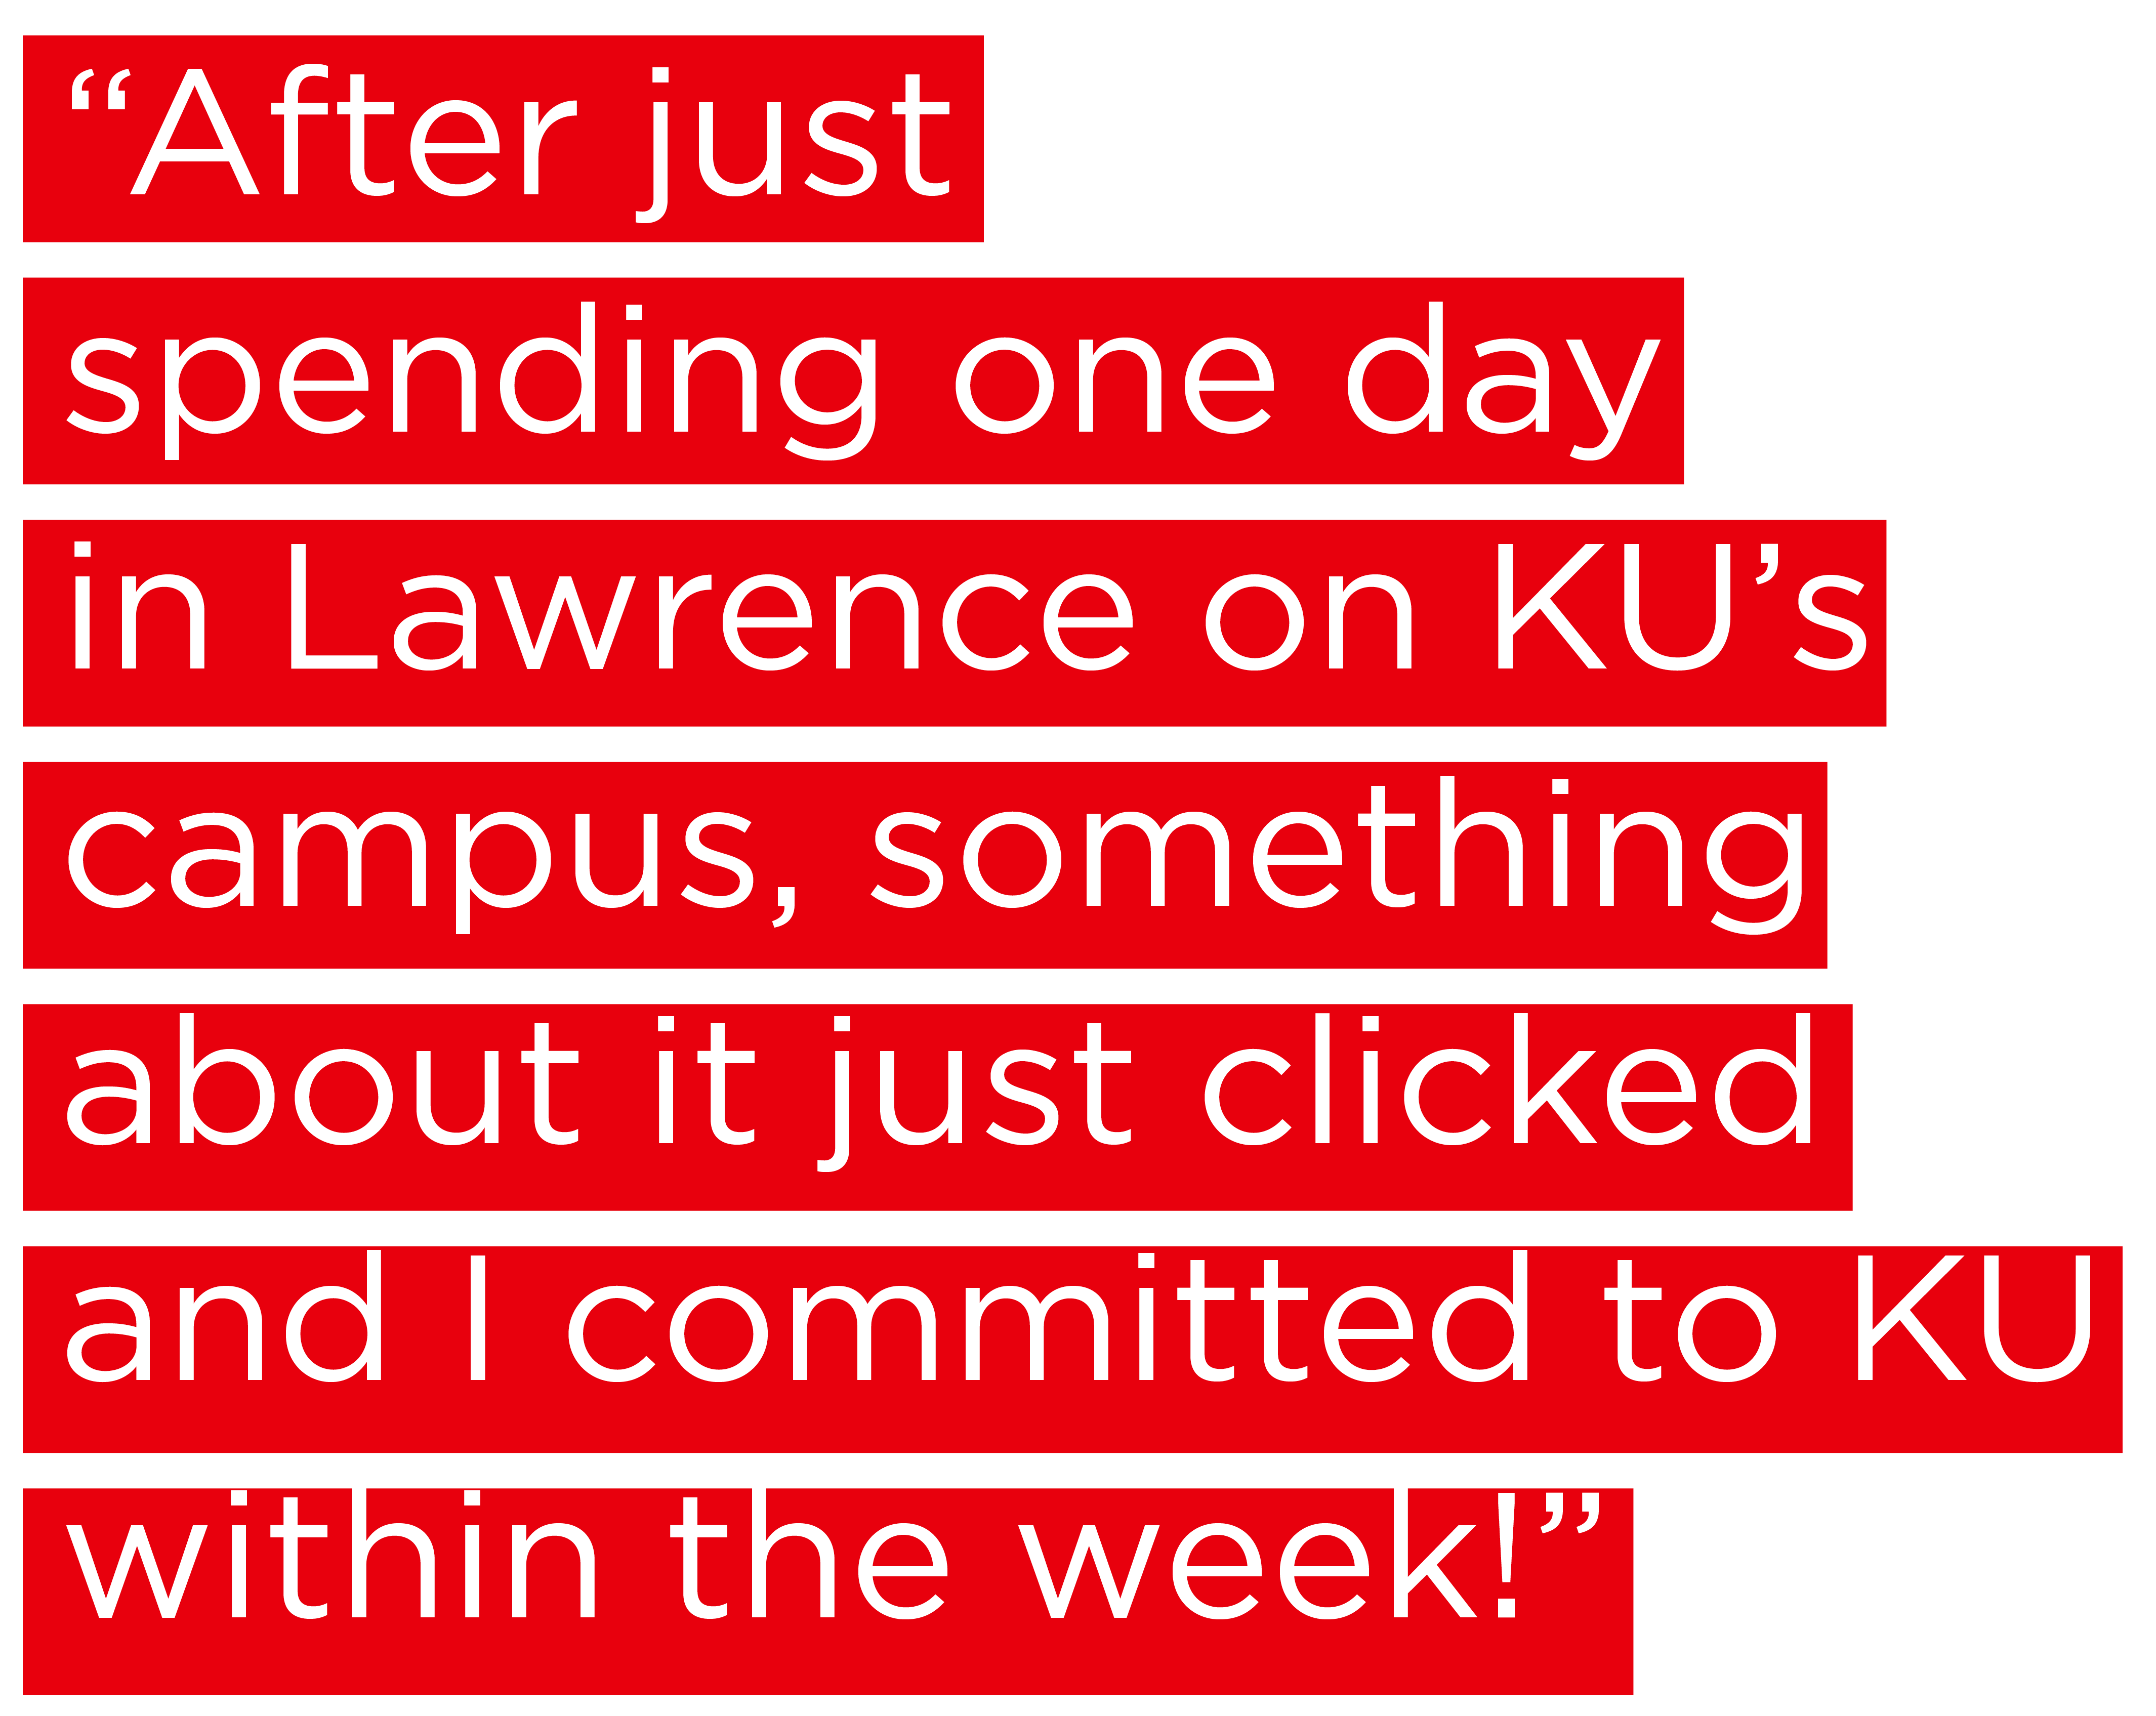 "After just spending one day in Lawrence on KU's campus, something about it just clicked and I committed to KU within the week!"